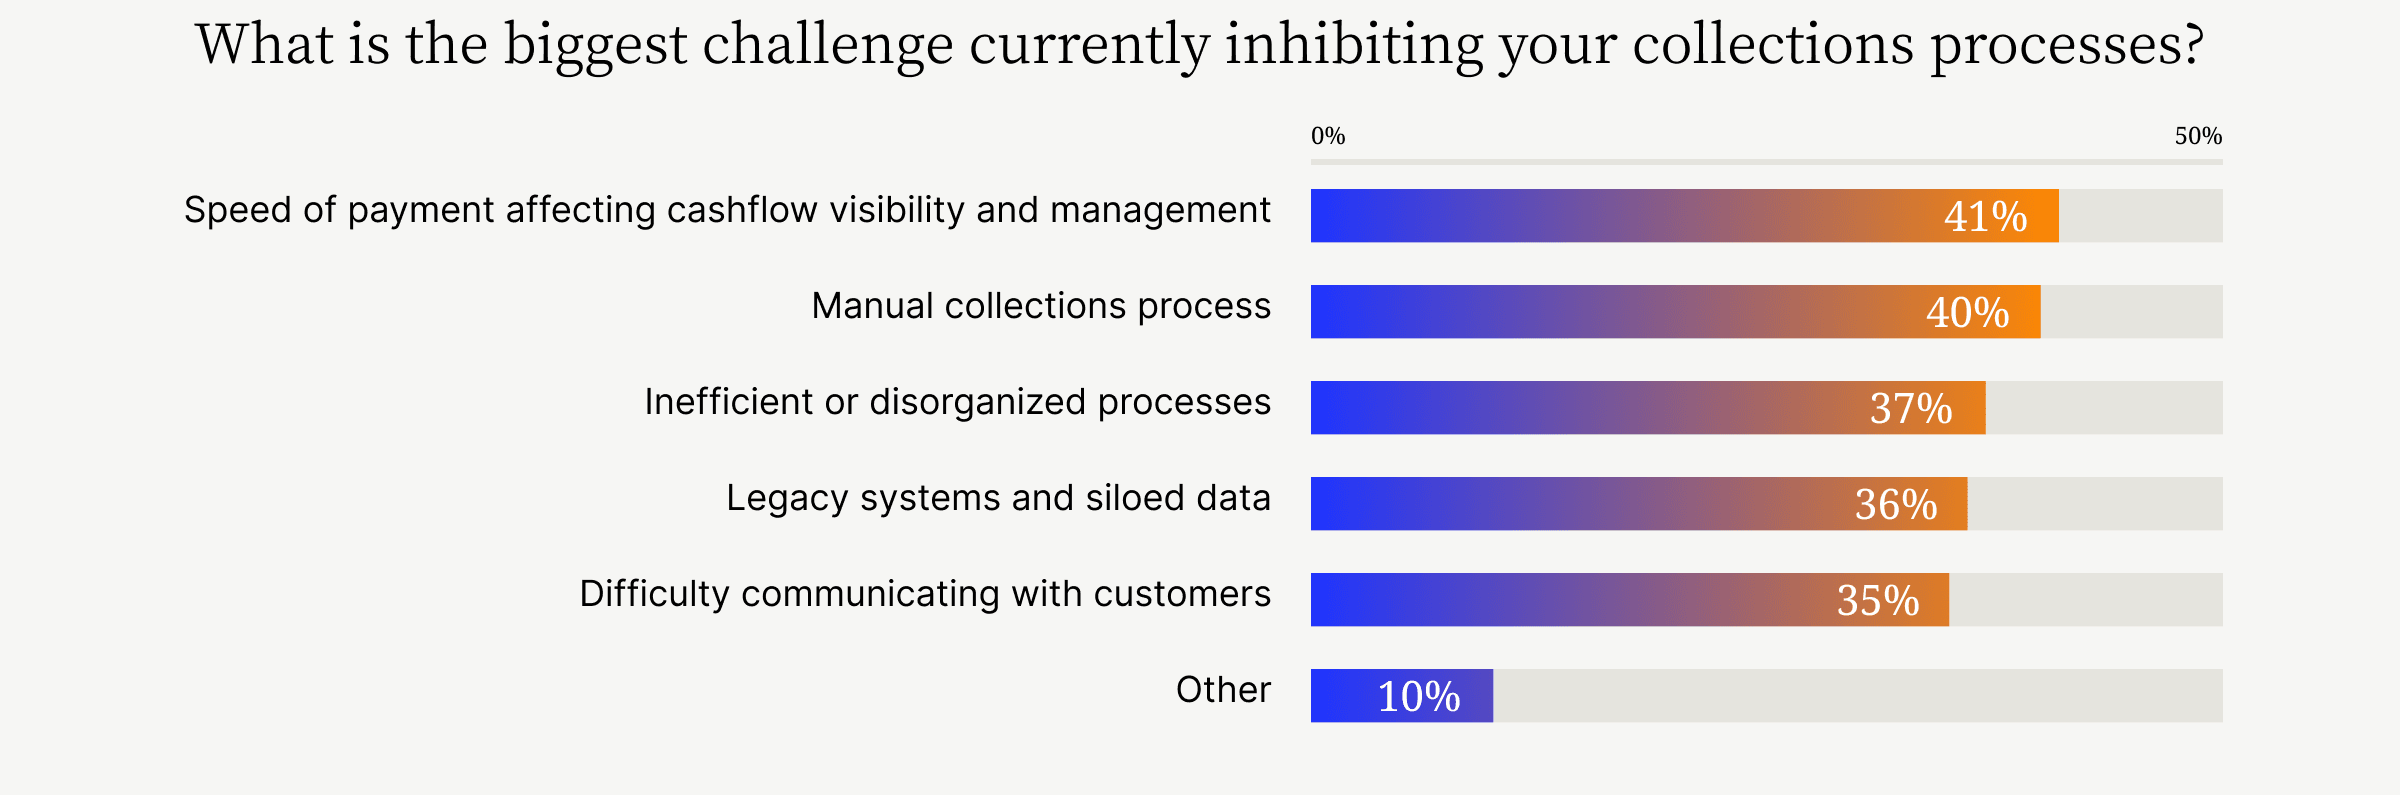 The biggest challenge currently inhibiting collections processes